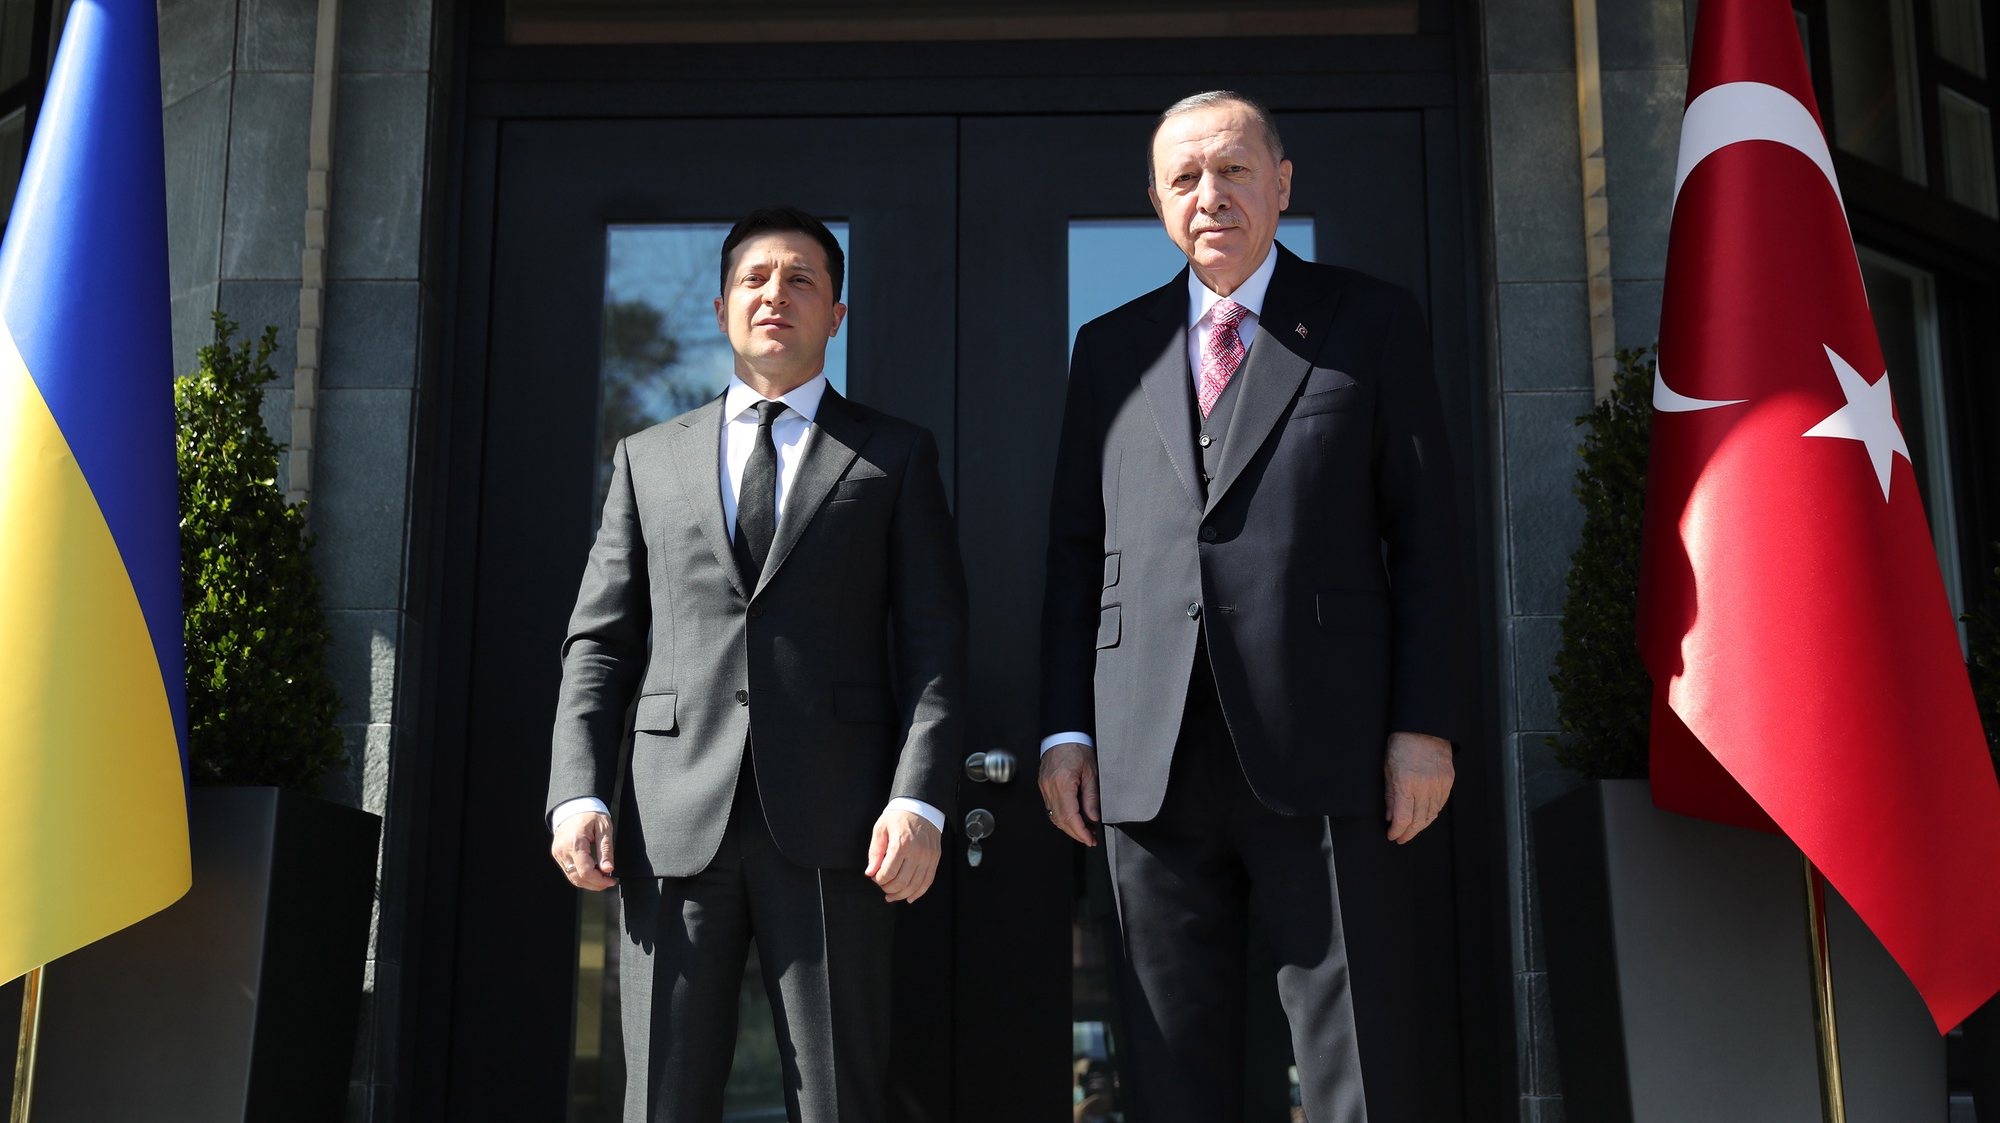 epa09126590 A handout photo made available by the Turkish President Press Office shows, Turkish President Recep Tayyip Erdogan (R) and Ukrainas President Volodymyr Zelensky (L) pose before their meeting in Istanbul, Turkey, 09 April 2021.  EPA/TURKISH PRESIDENT PRESS OFFICE / HANDOUT  HANDOUT EDITORIAL USE ONLY/NO SALES